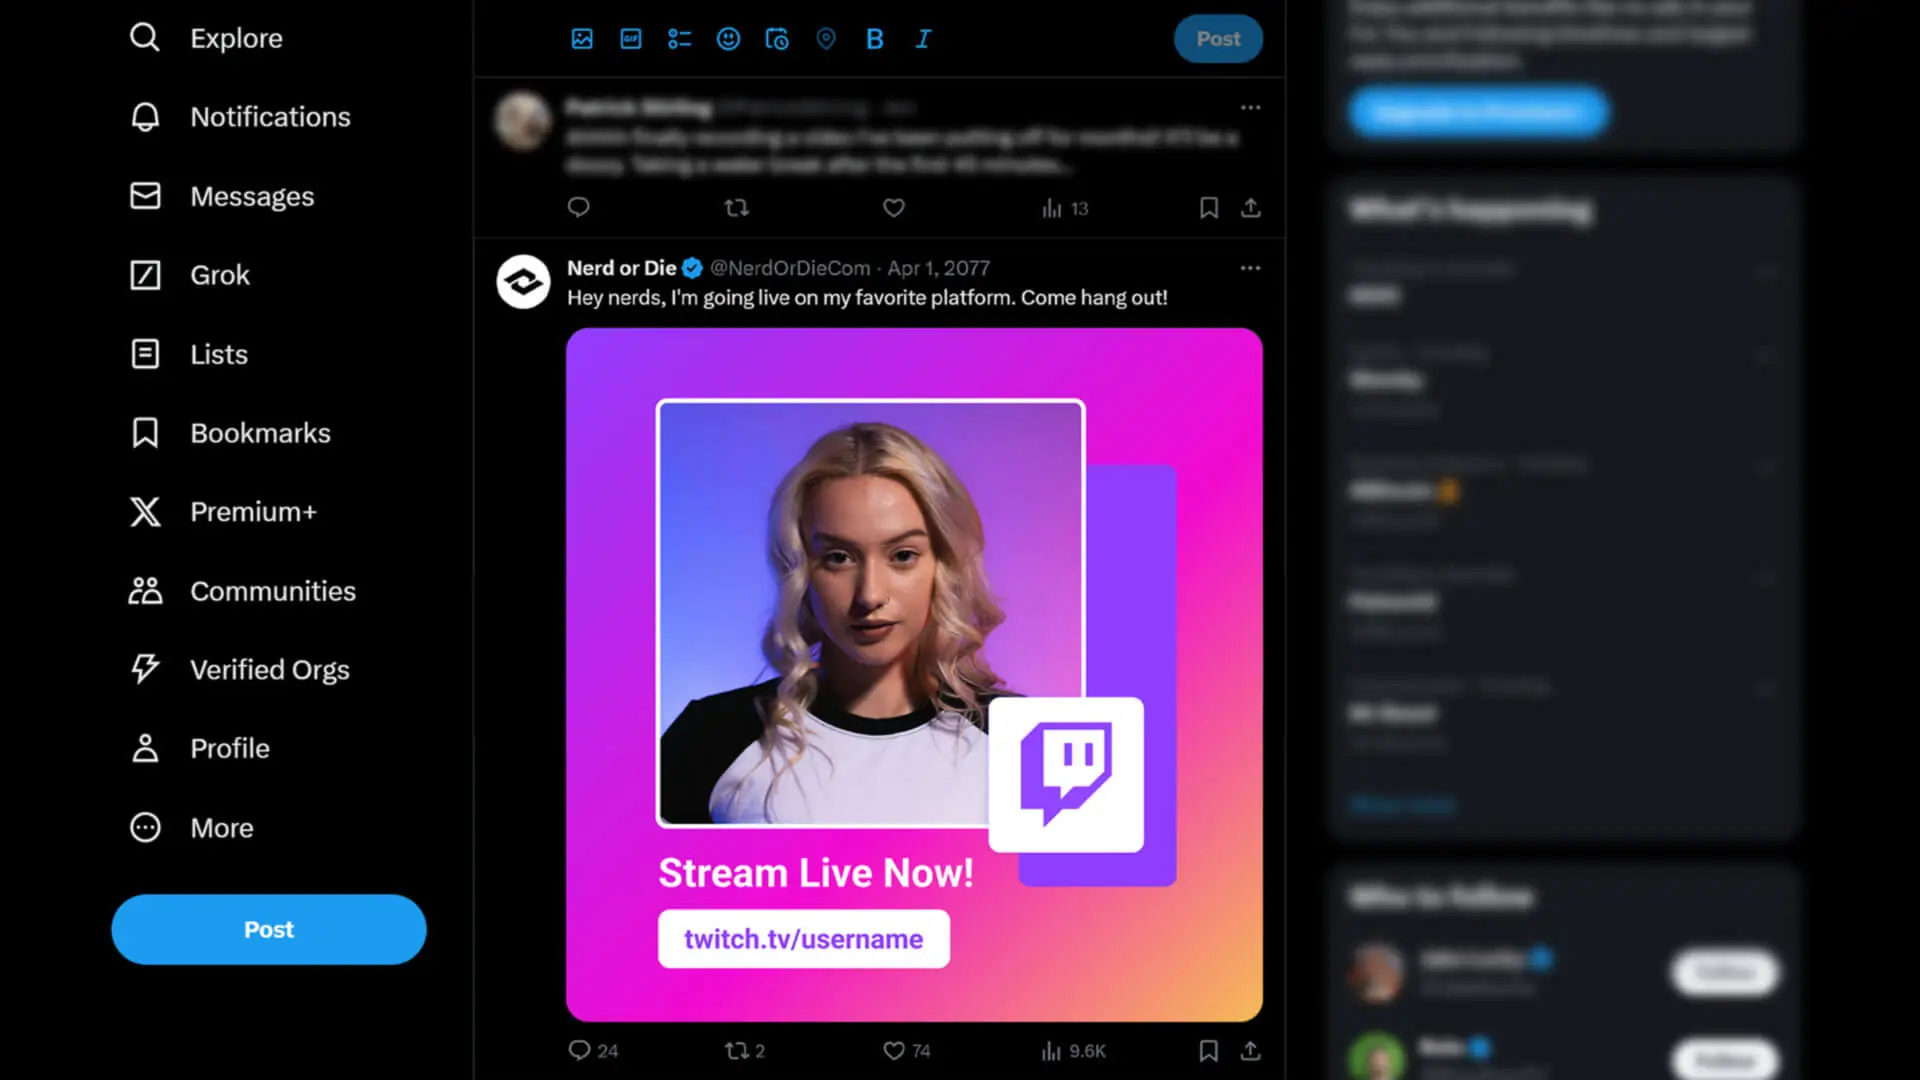 Going Live on Twitch - Twitter Post